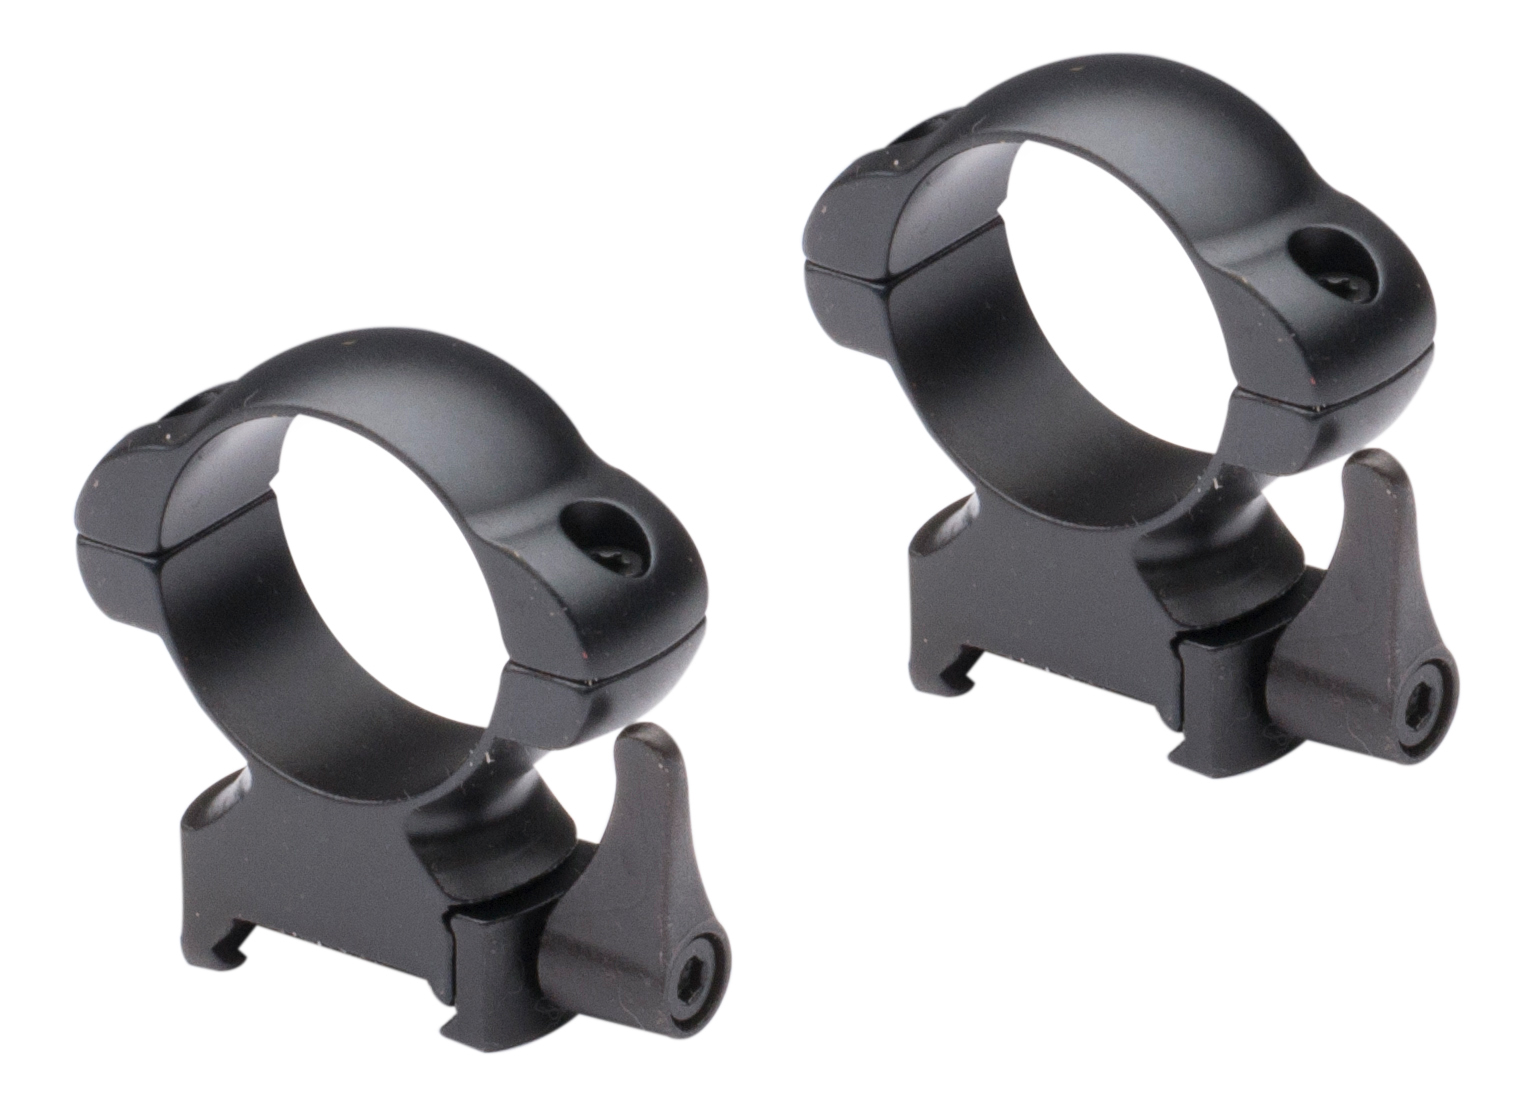 Nikko Stirling Quick Release Rifle Scope Rings | Up to 15% Off 